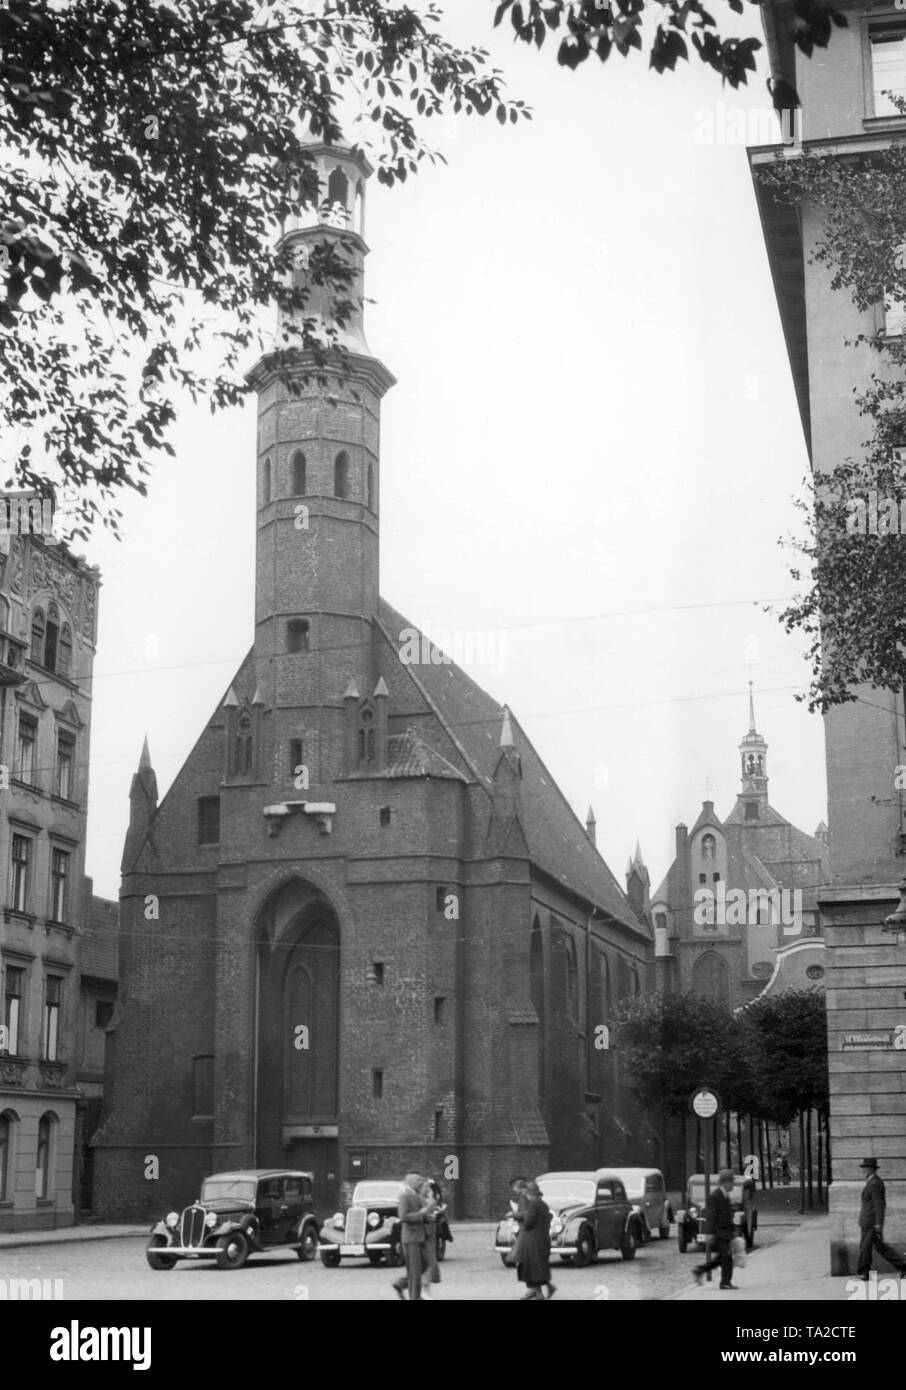 In the foreground the former garrison church St. Elisabeth and behind it the Weissmoenchenkirche in Danzig. The Church of St. Elisabeth was built from 1393 to 1417 and dates back to the Gothic period. St. Elizabeth was the second church of the Gdansk Evangelical Reformed Church. Stock Photo